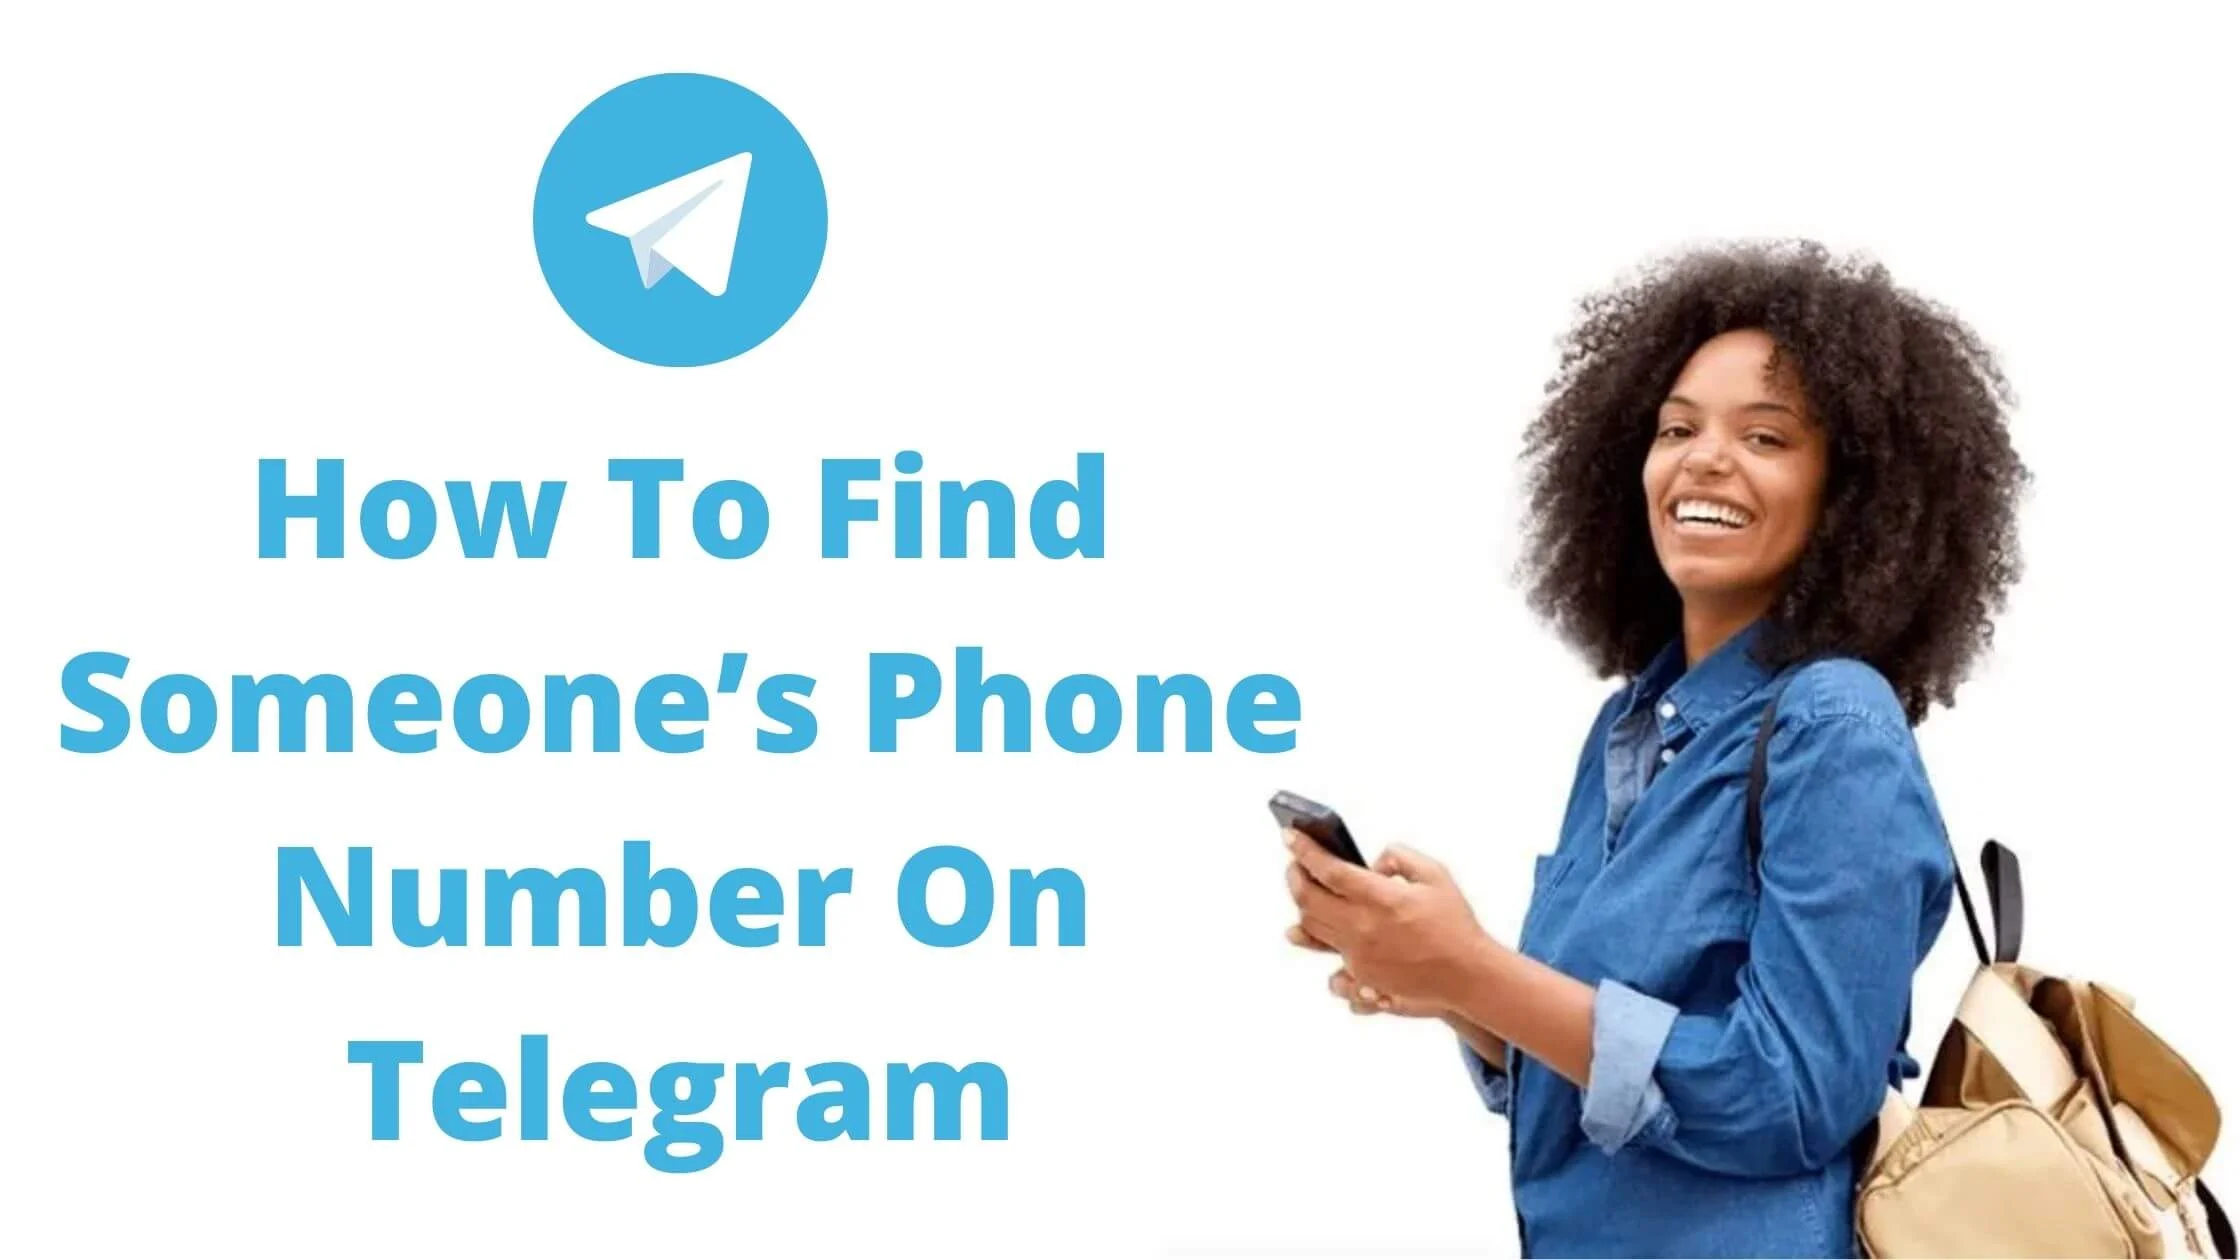 How To Find Someone’s Phone Number On Telegram